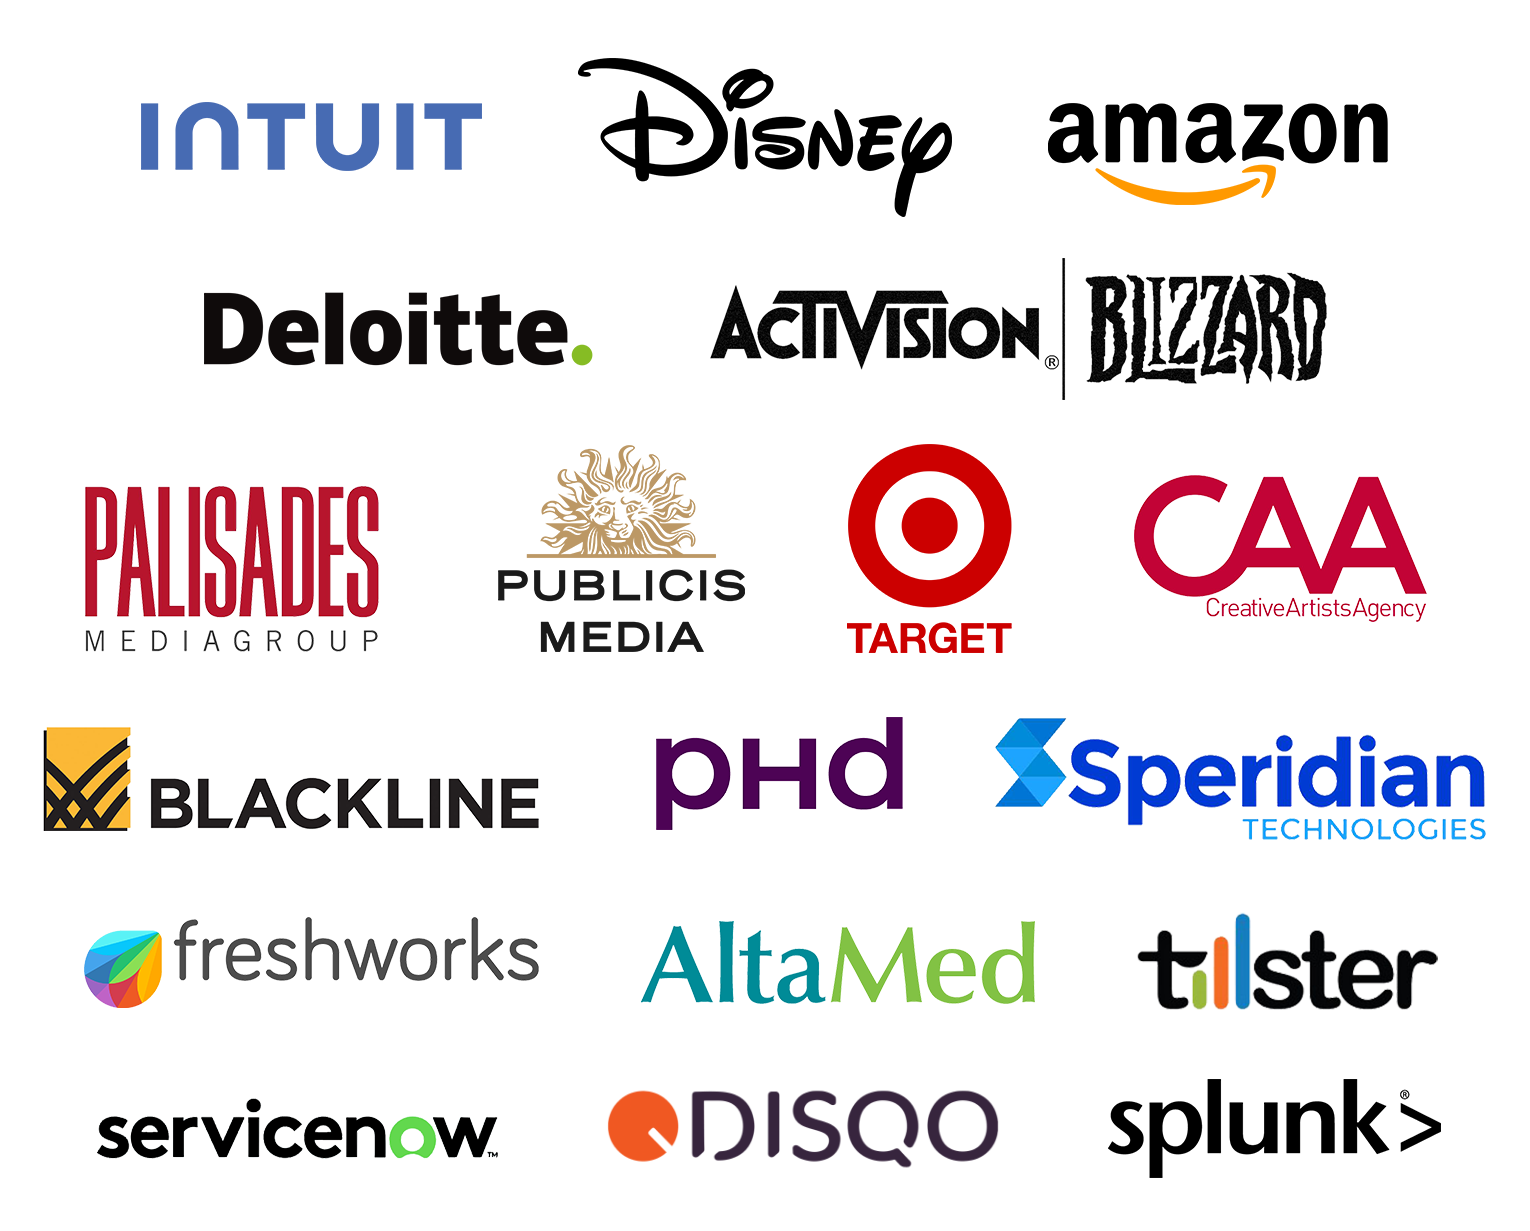 Collage of institutions logos including Activision | Blizzard, AltaMed, Amazon, Blackline, Creative Artists Agency, Deloitte, Disney, Disqo, Freshworks, Intuit, Palisades Media Group, PHD Worldwide, Publicis Media, ServiceNow, Speridian Technologies, Target and Tillster.